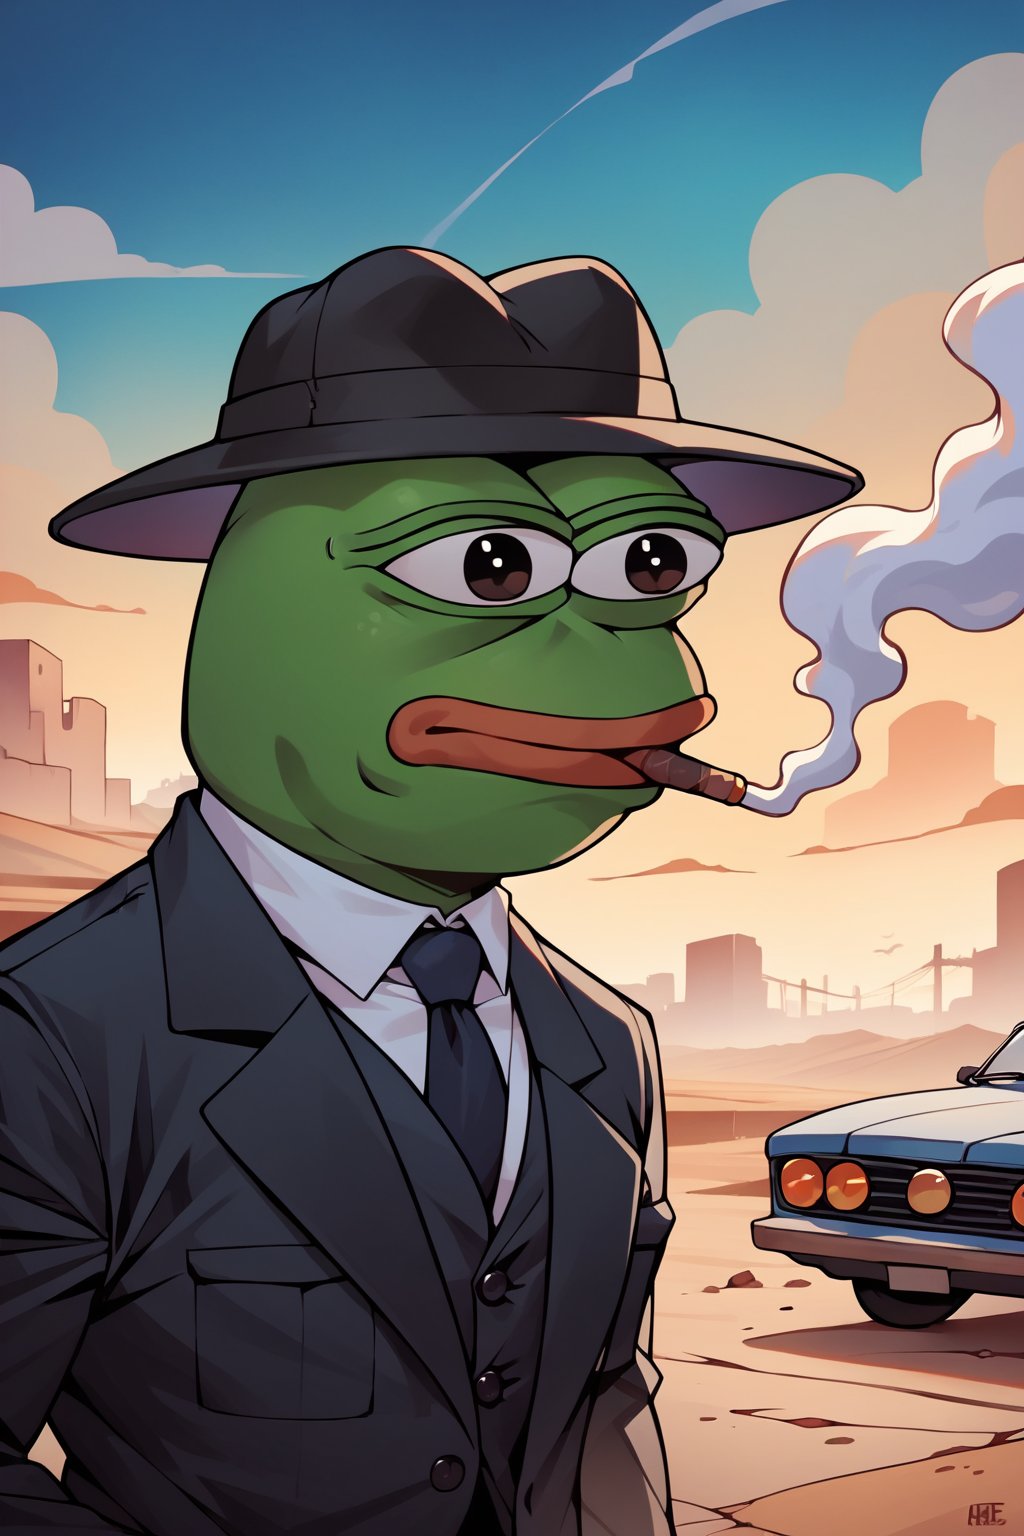 score_9, score_8, score_7, score_7_up, score_8_up, pepe the frog wearing black business suit, cowbot hat, smoking a cigar, upper body, mojave desert, classic car in background, apocalyptic, exterior, night,0ut3rsp4c3